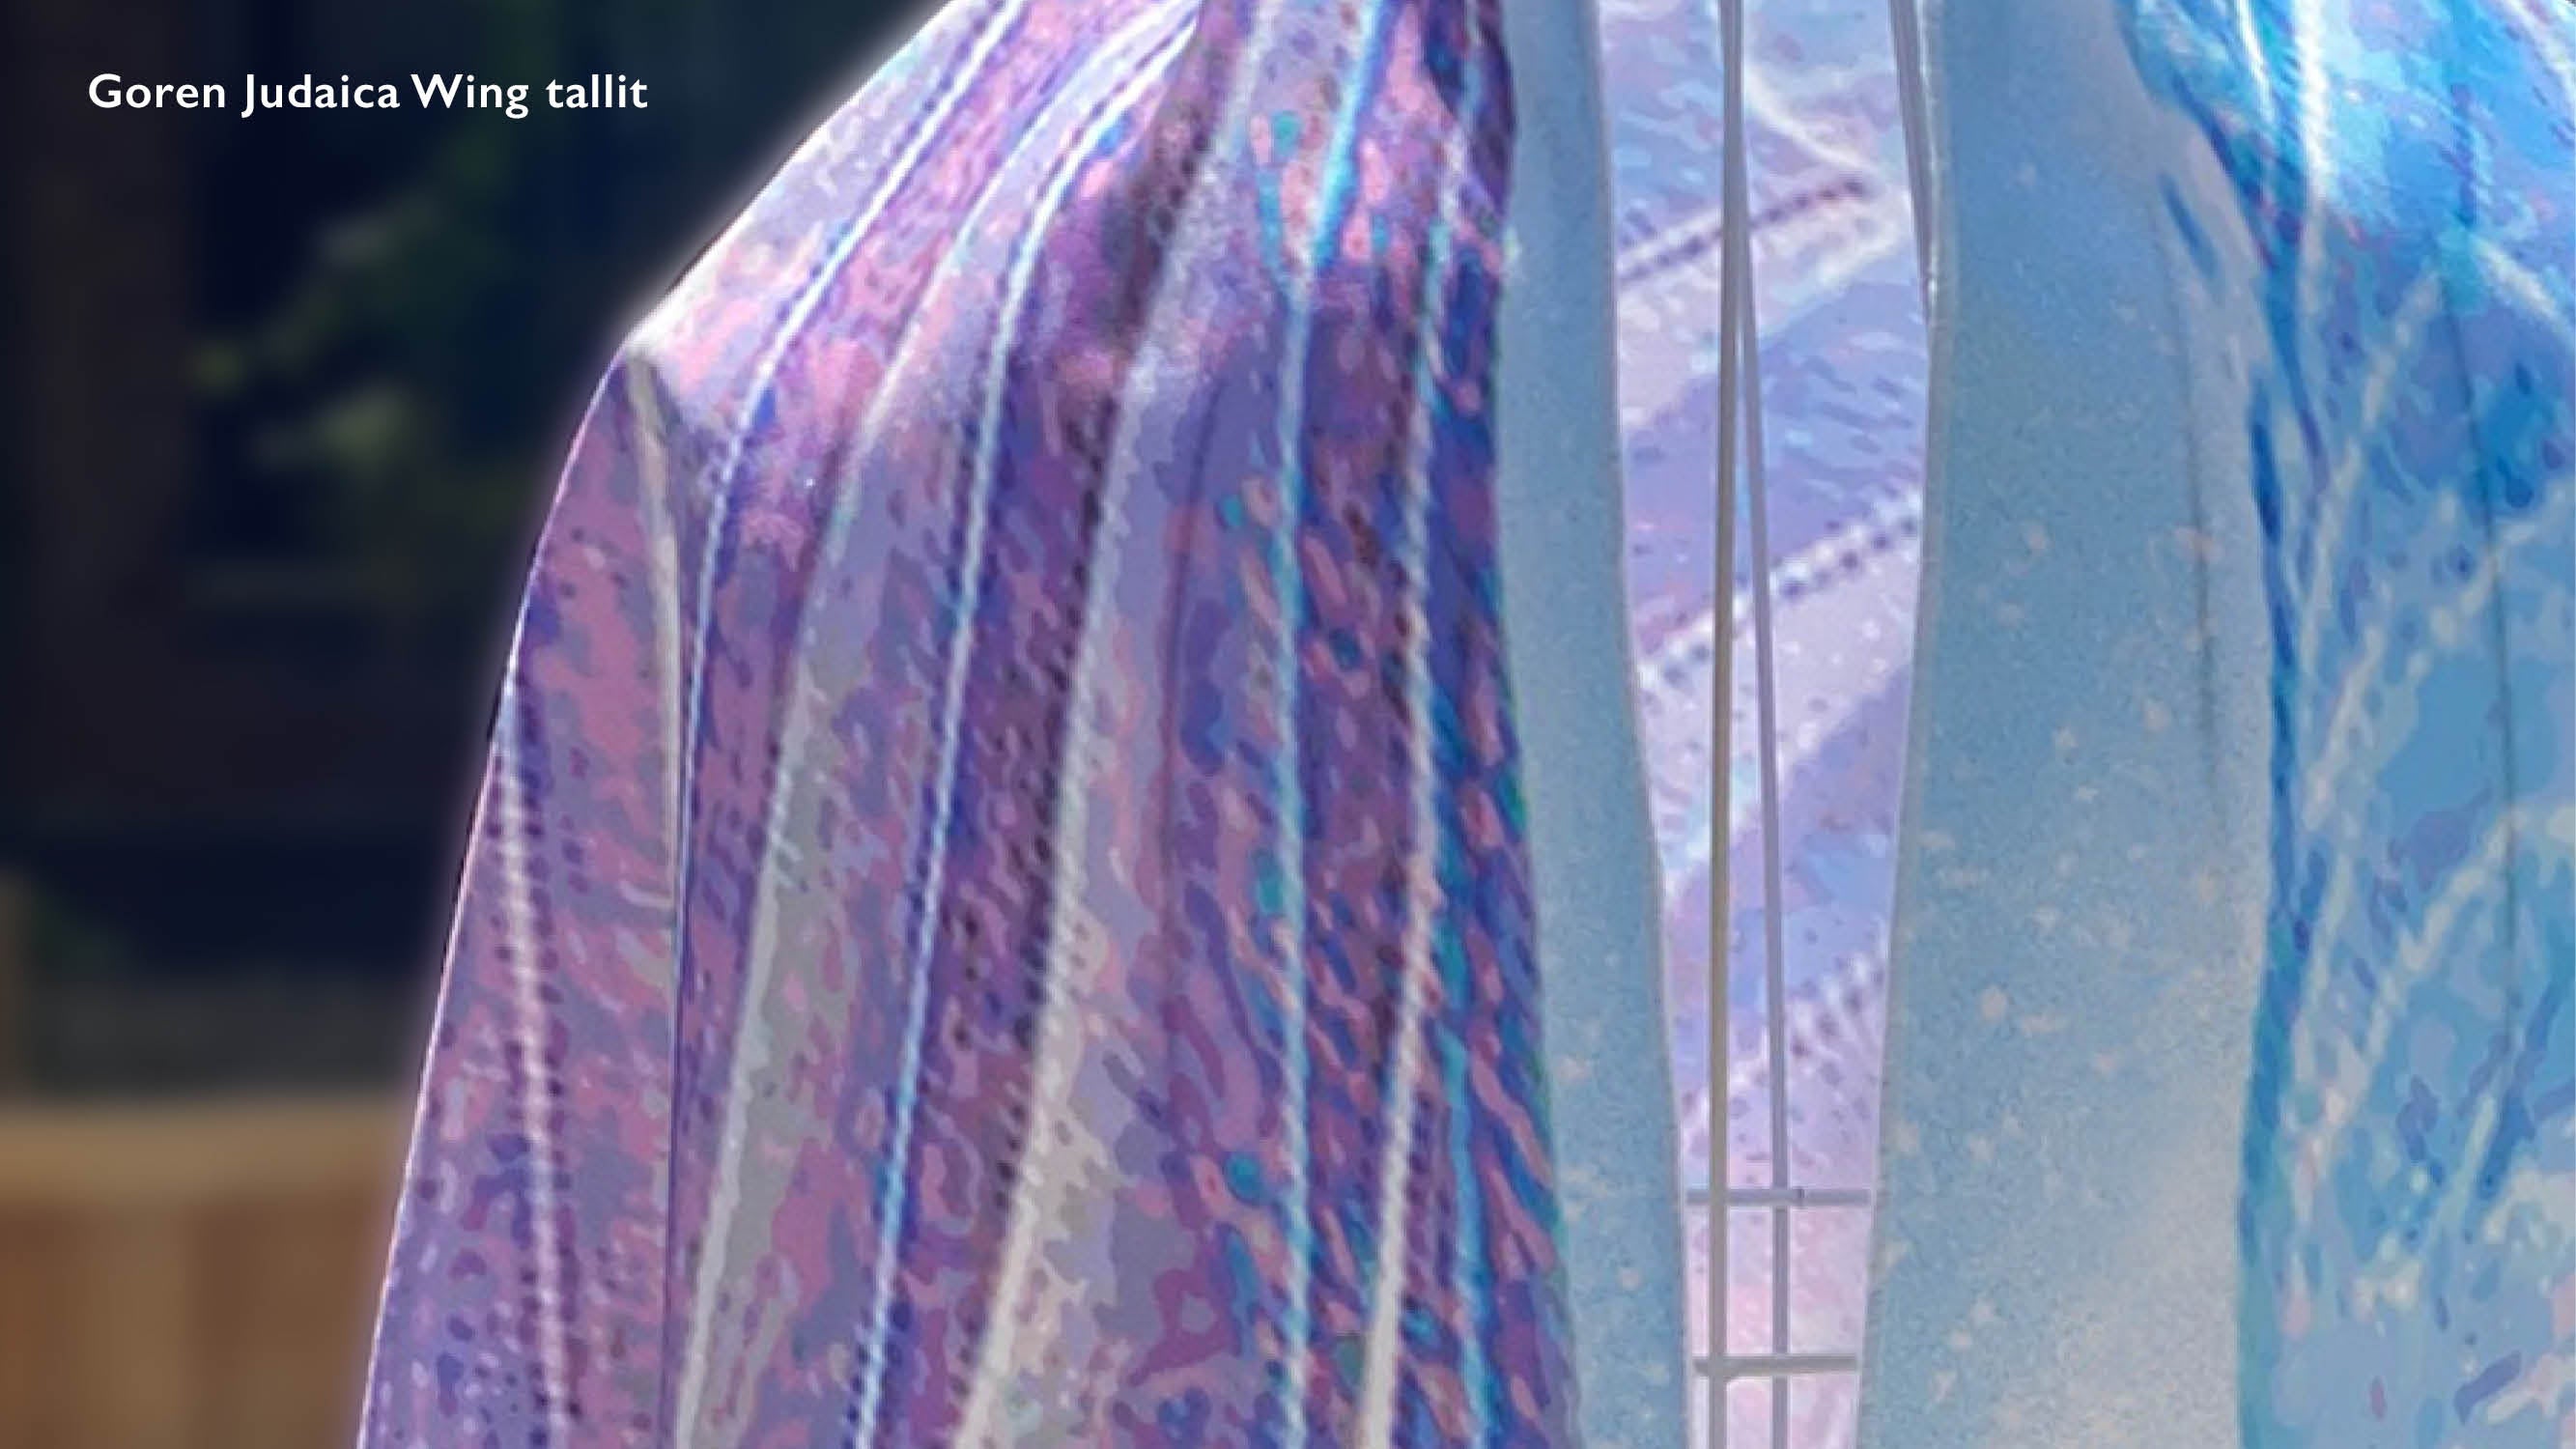 Load video: Video about my Wing tallit design